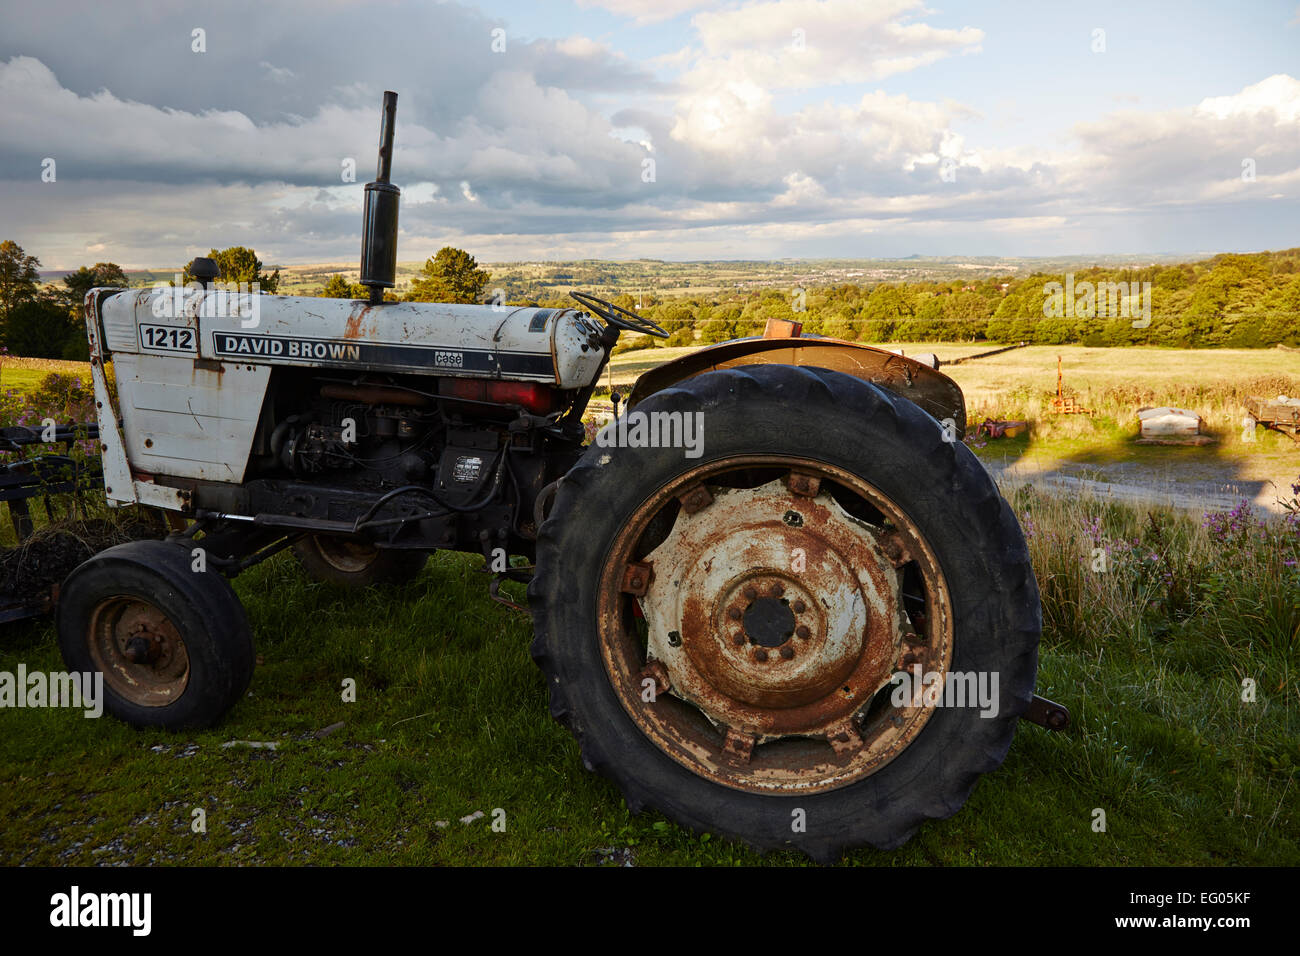 1212 david brown old vintage tractor on farm Stock Photo